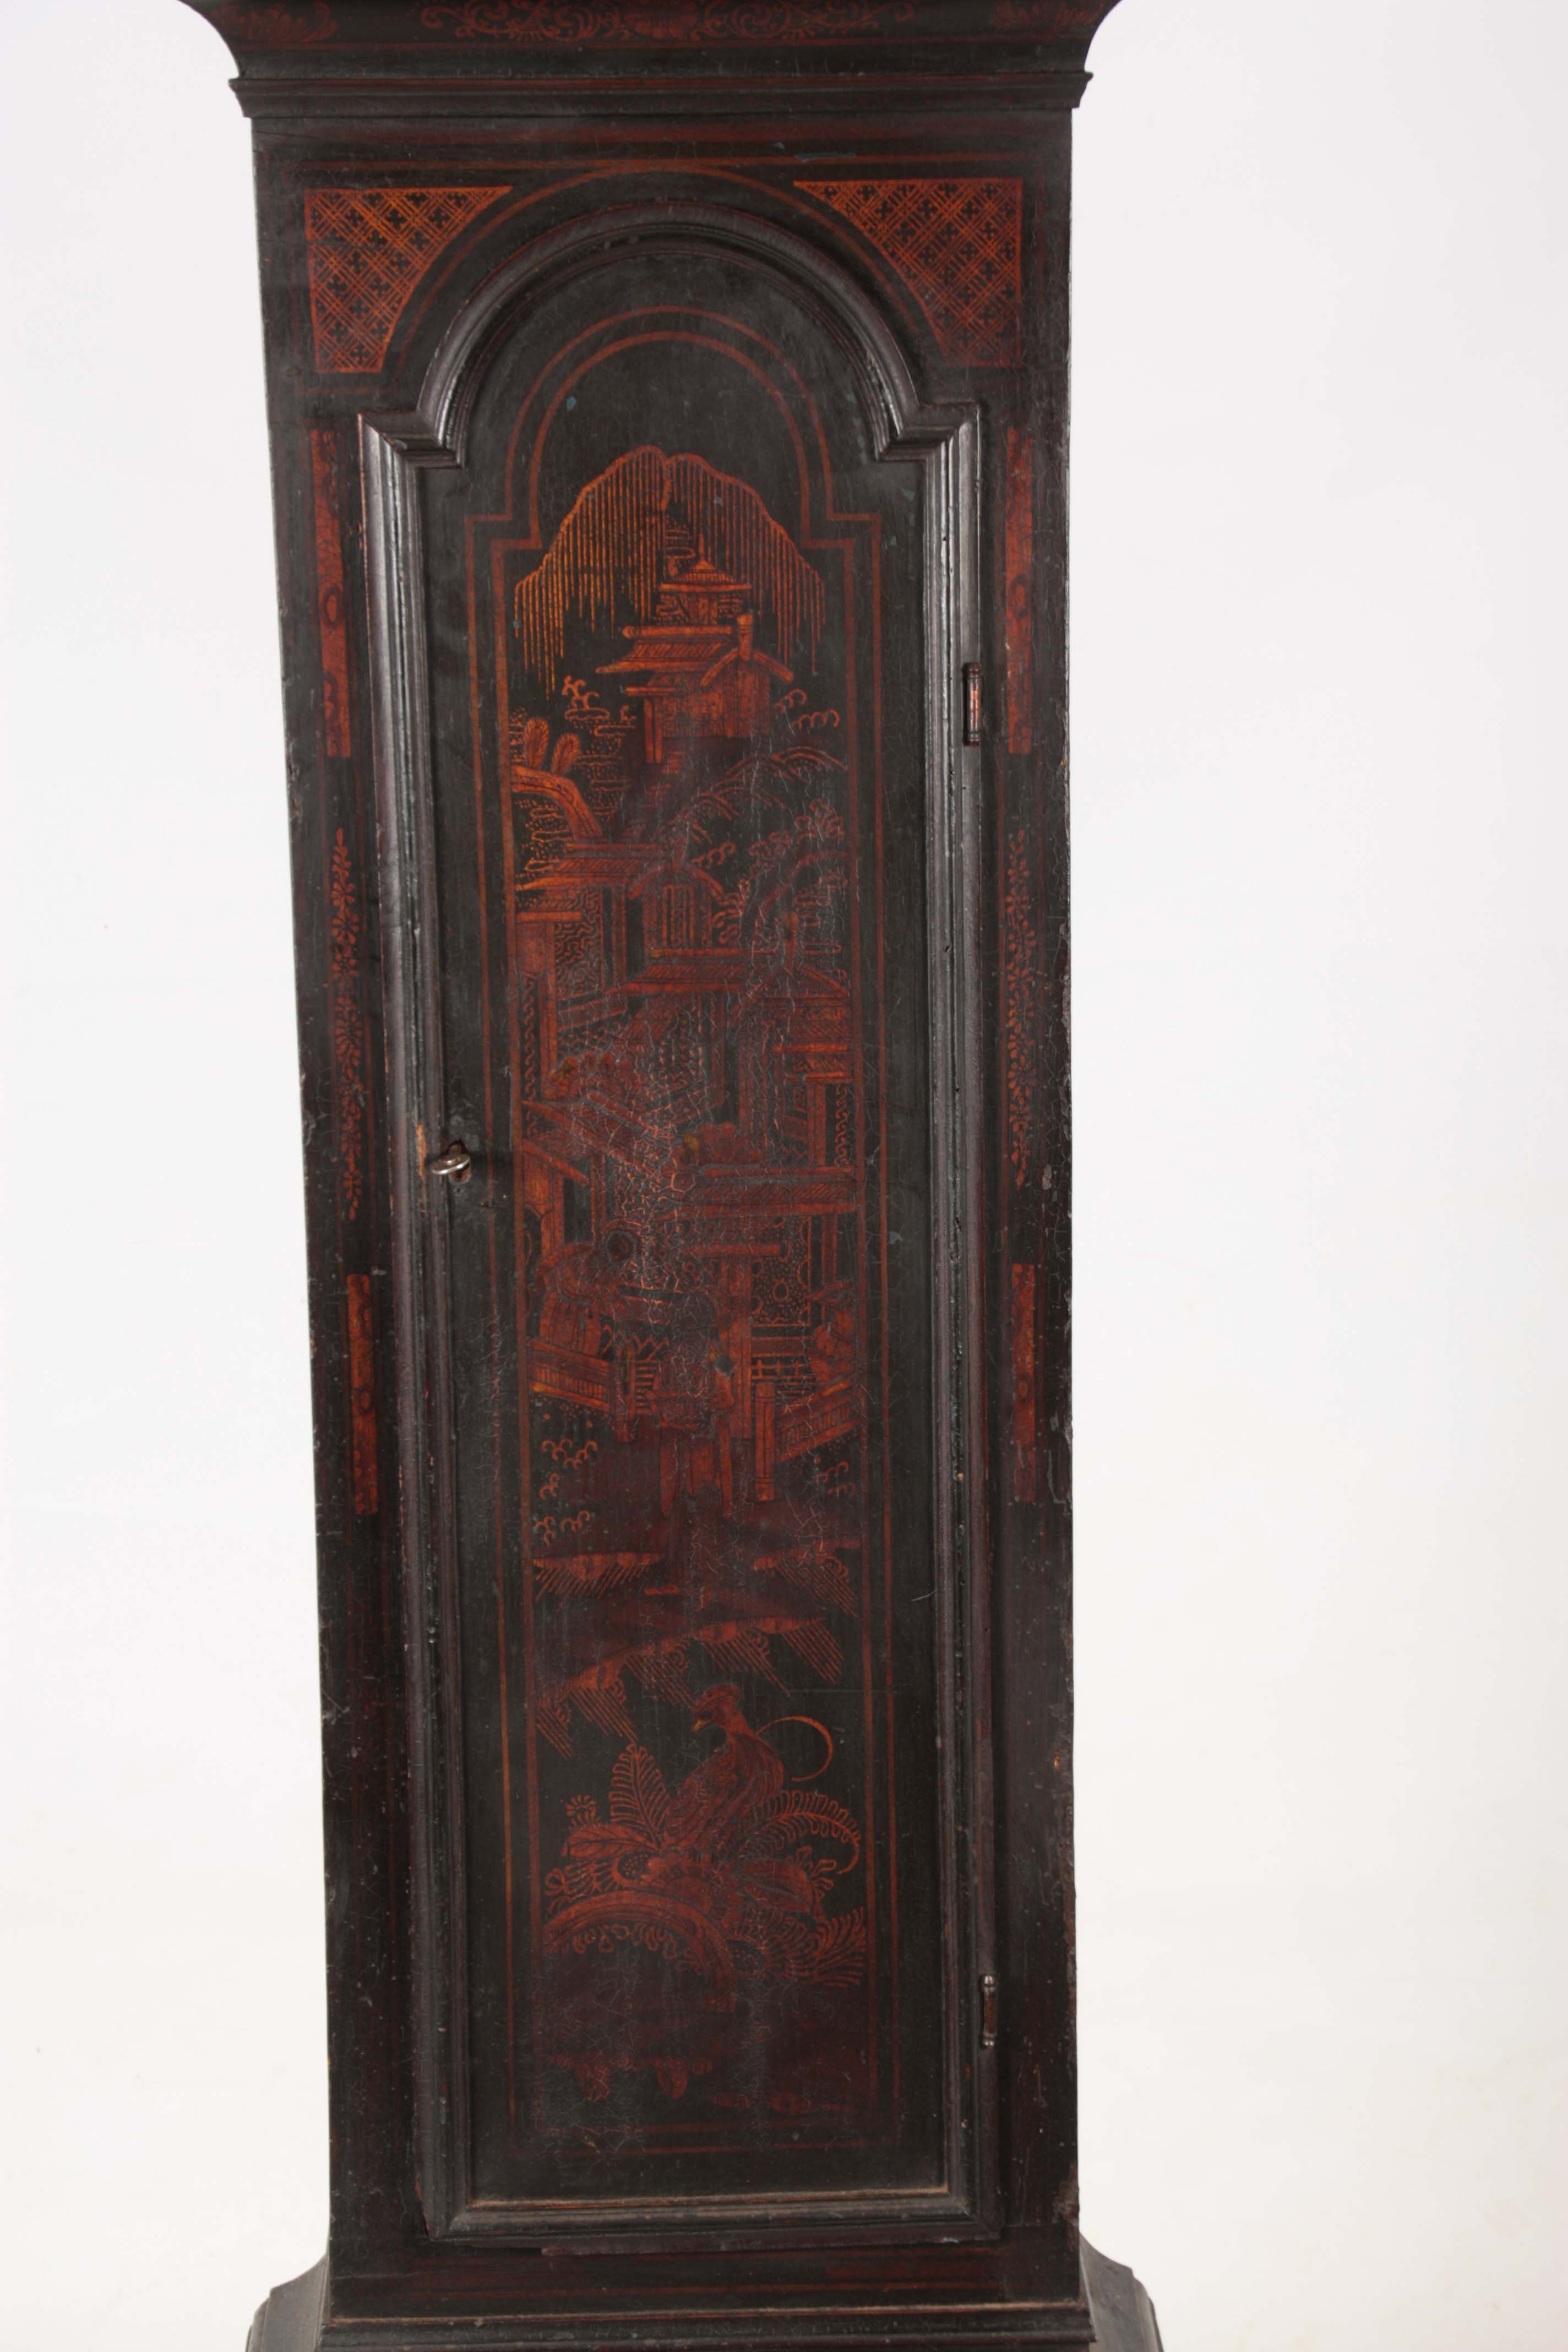 MARK DELURE, LONDON. A MID 18TH CENTURY LACQUERED LONGCASE CLOCK the chinoiserie lacquered oak - Image 4 of 10